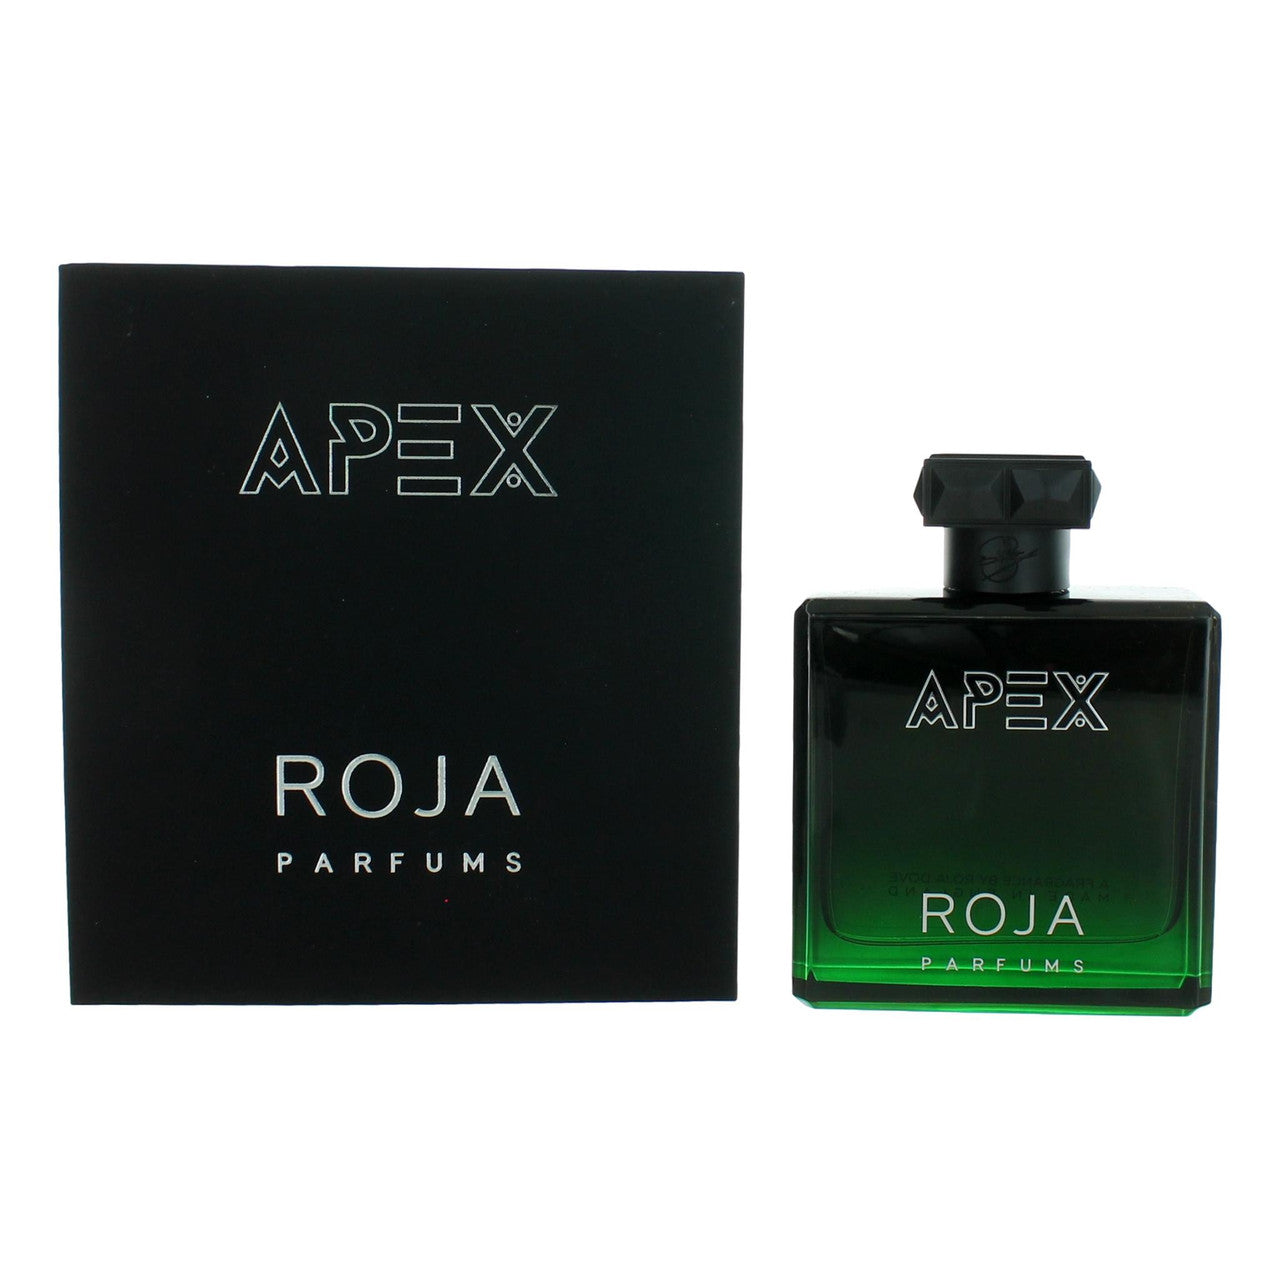 3.4 oz bottle of Apex by Roja Parfums